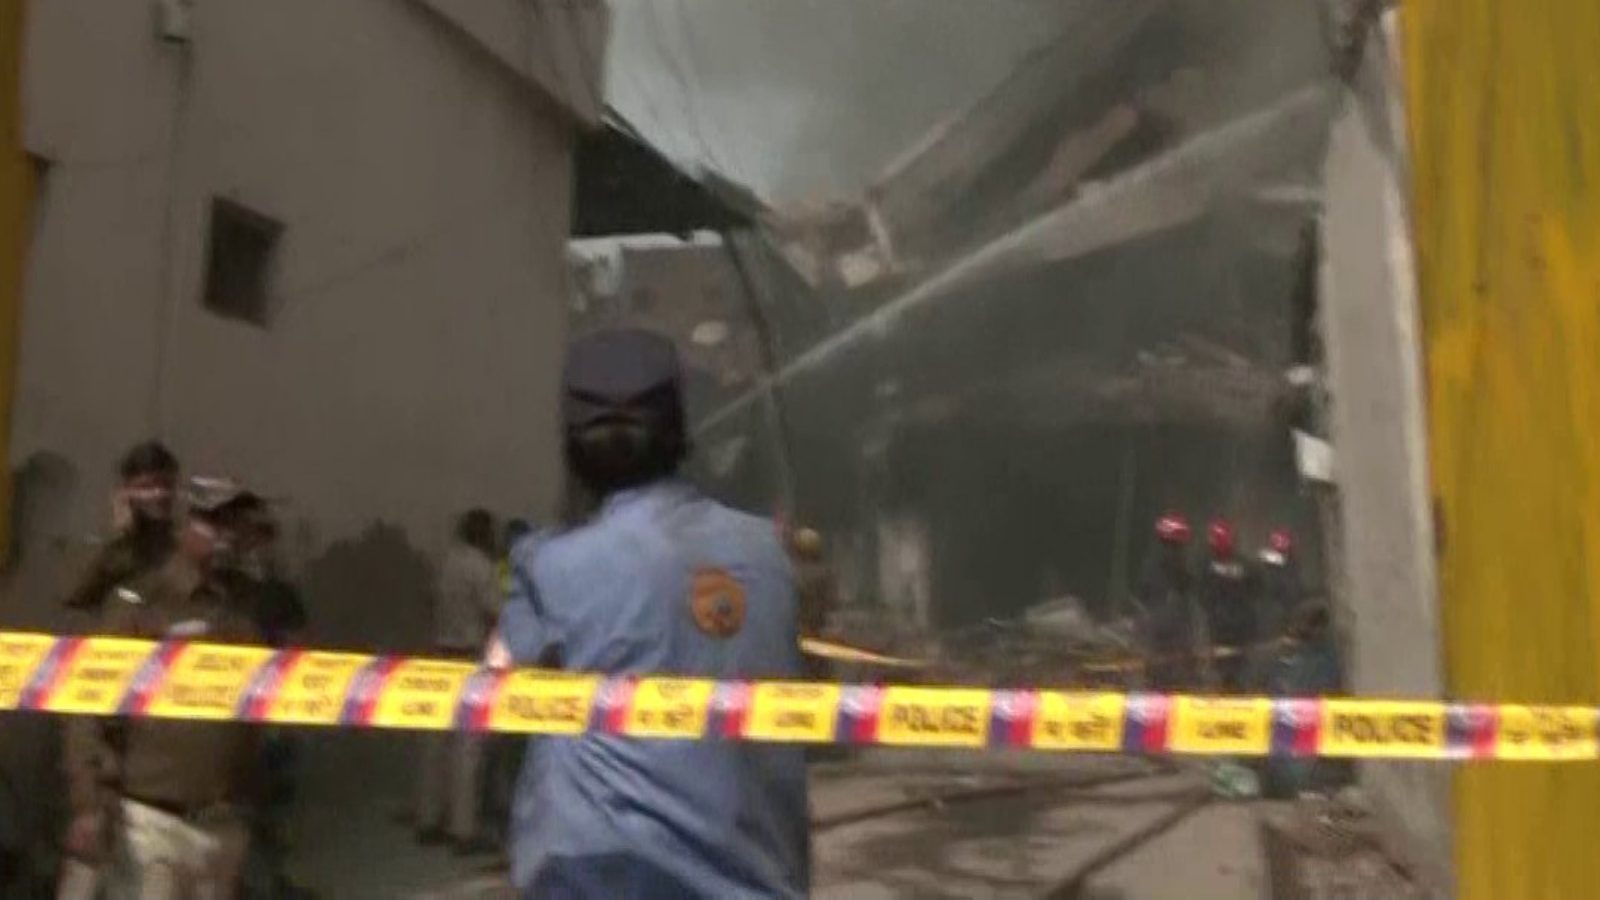 On Cam: 4-Story Building Collapses Like House of Cards During Firefighting Operation in Delhi